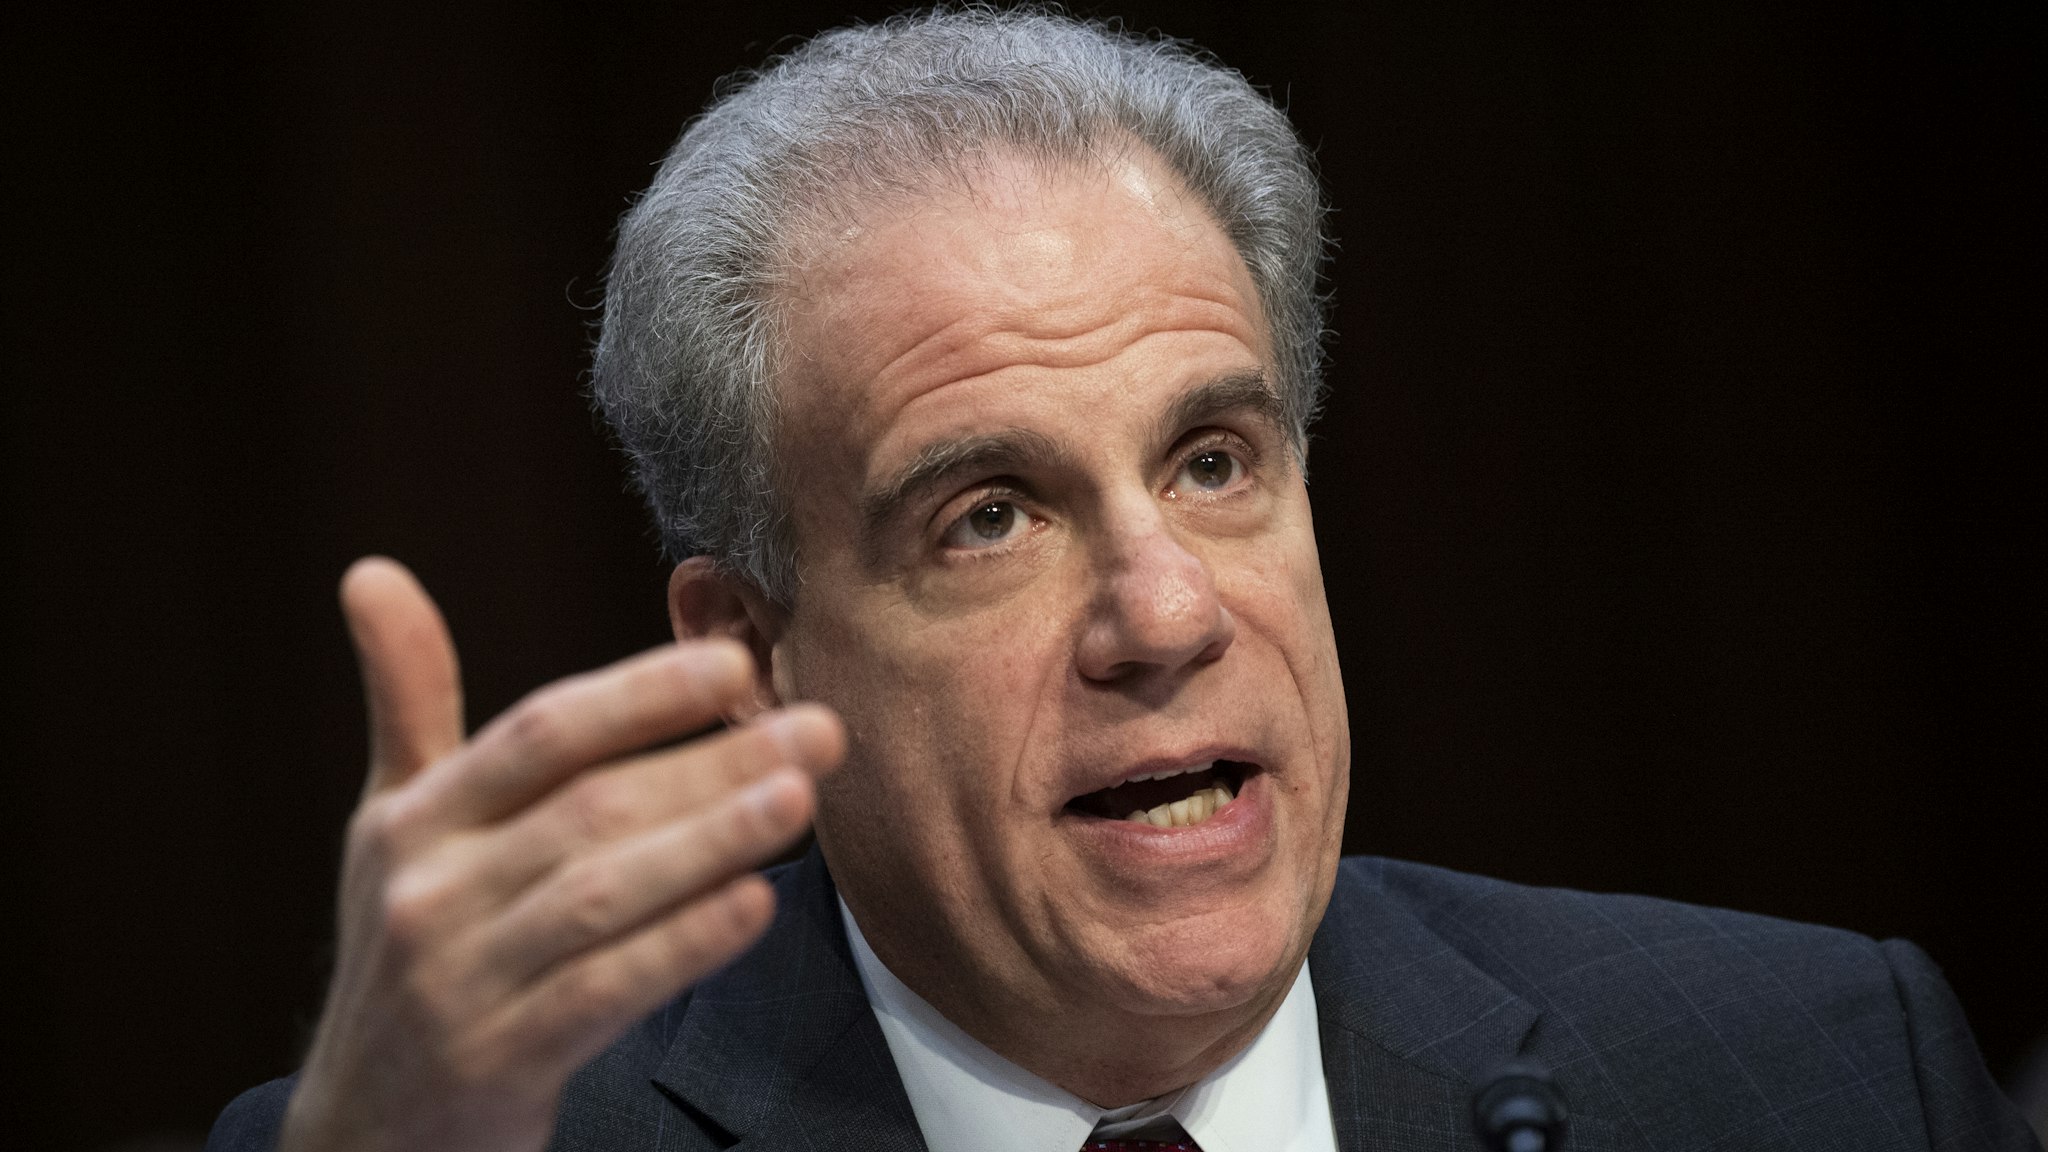 Justice Department Inspector General Michael Horowitz testifies before the Senate Judiciary Committee for a hearing on "Examining the Inspector General's report on alleged abuses of the Foreign Intelligence Surveillance Act (FISA) on Wednesday Dec. 11, 2019.